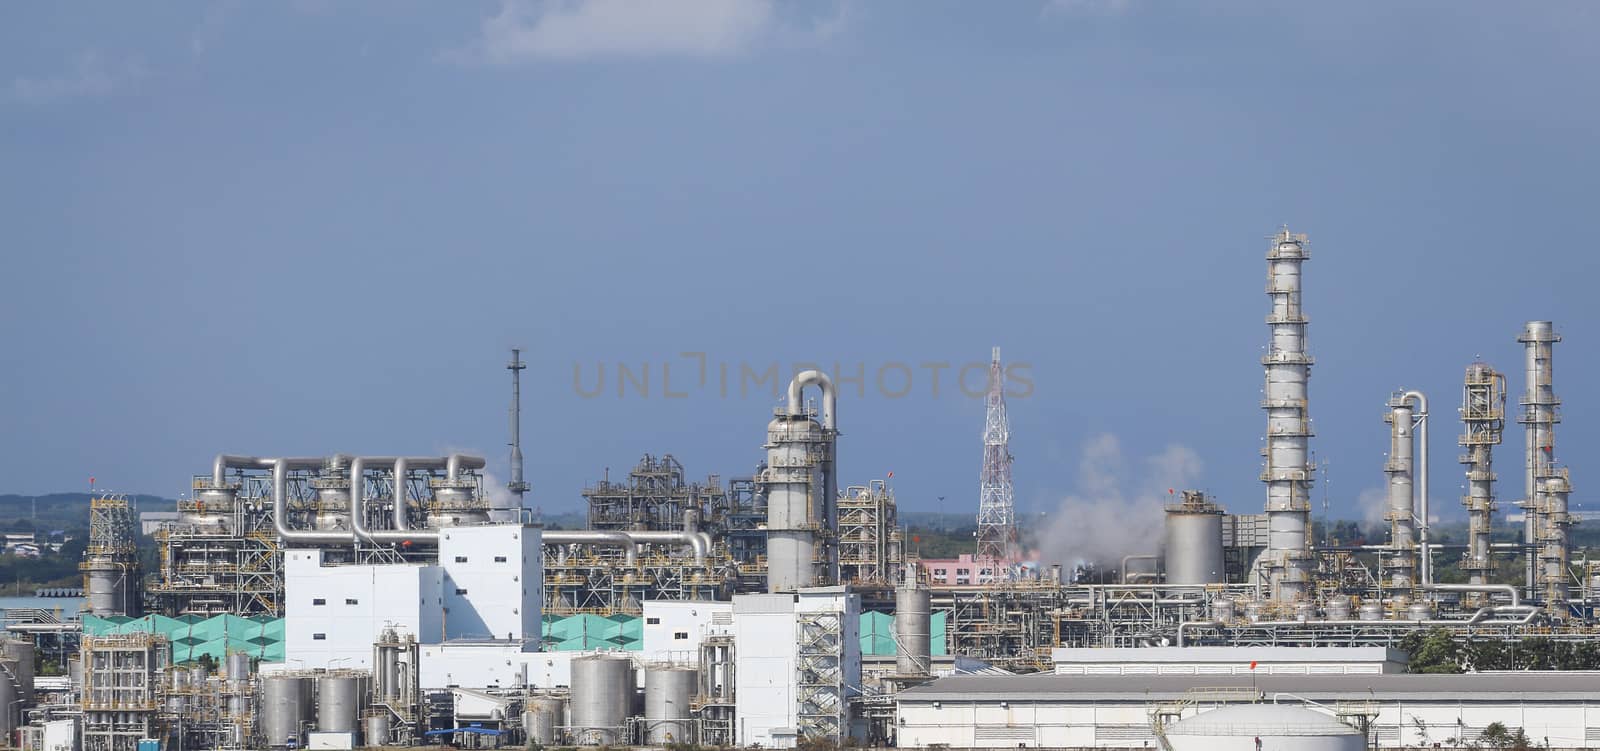 Panorama view of Refinery industrial factory area by supakitmod